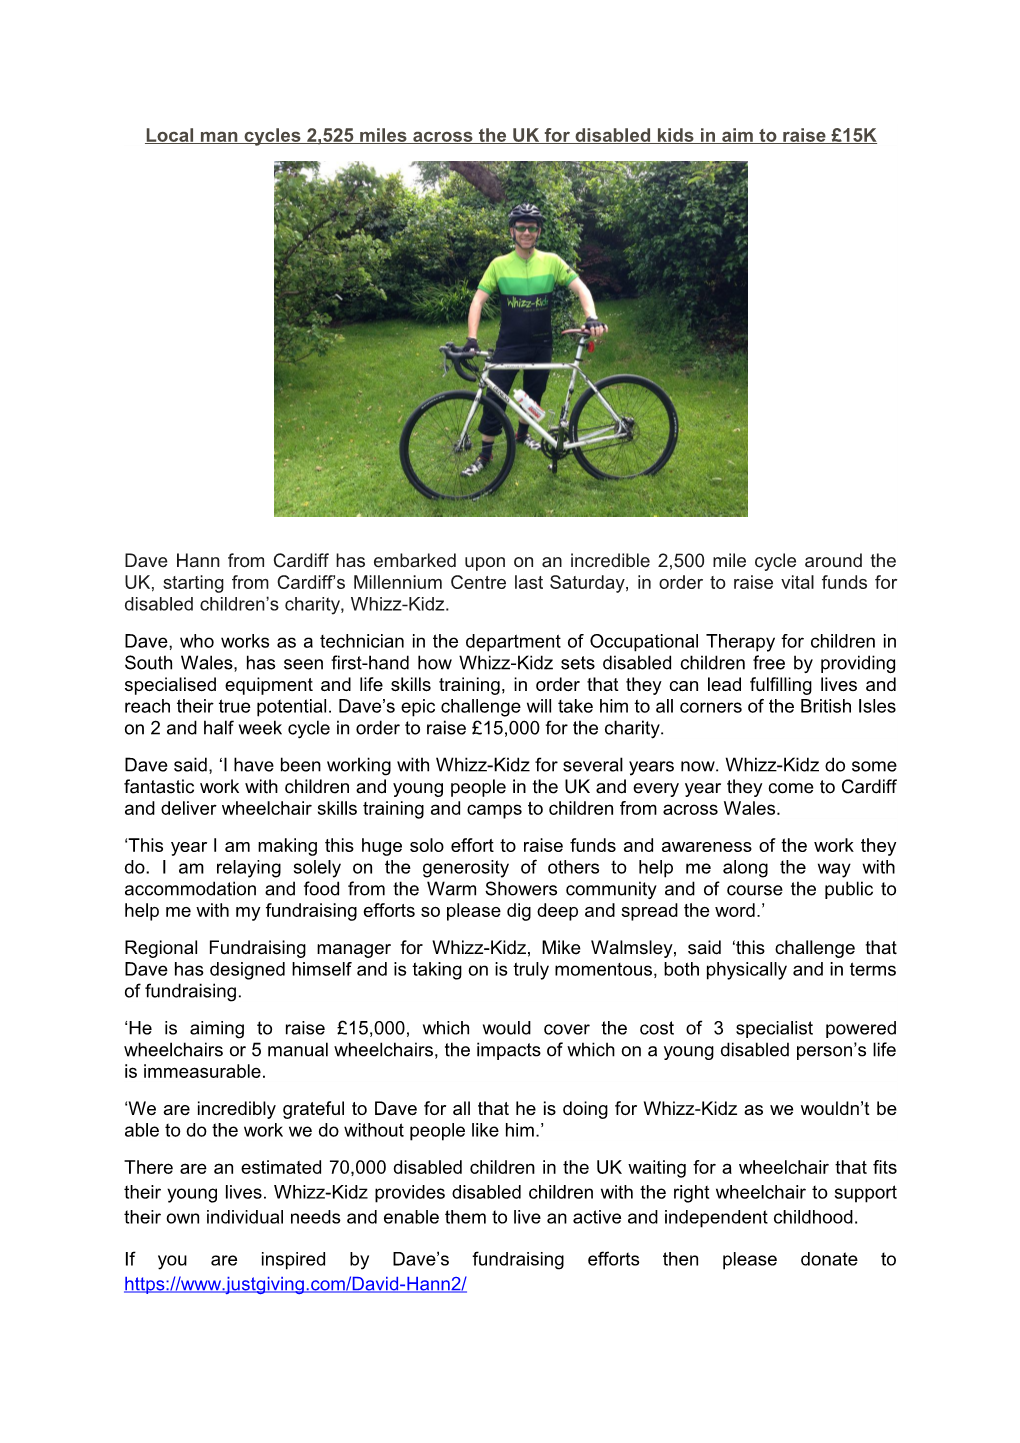 Local Man Cycles 2,525 Miles Across the UK for Disabled Kids in Aim to Raise 15K